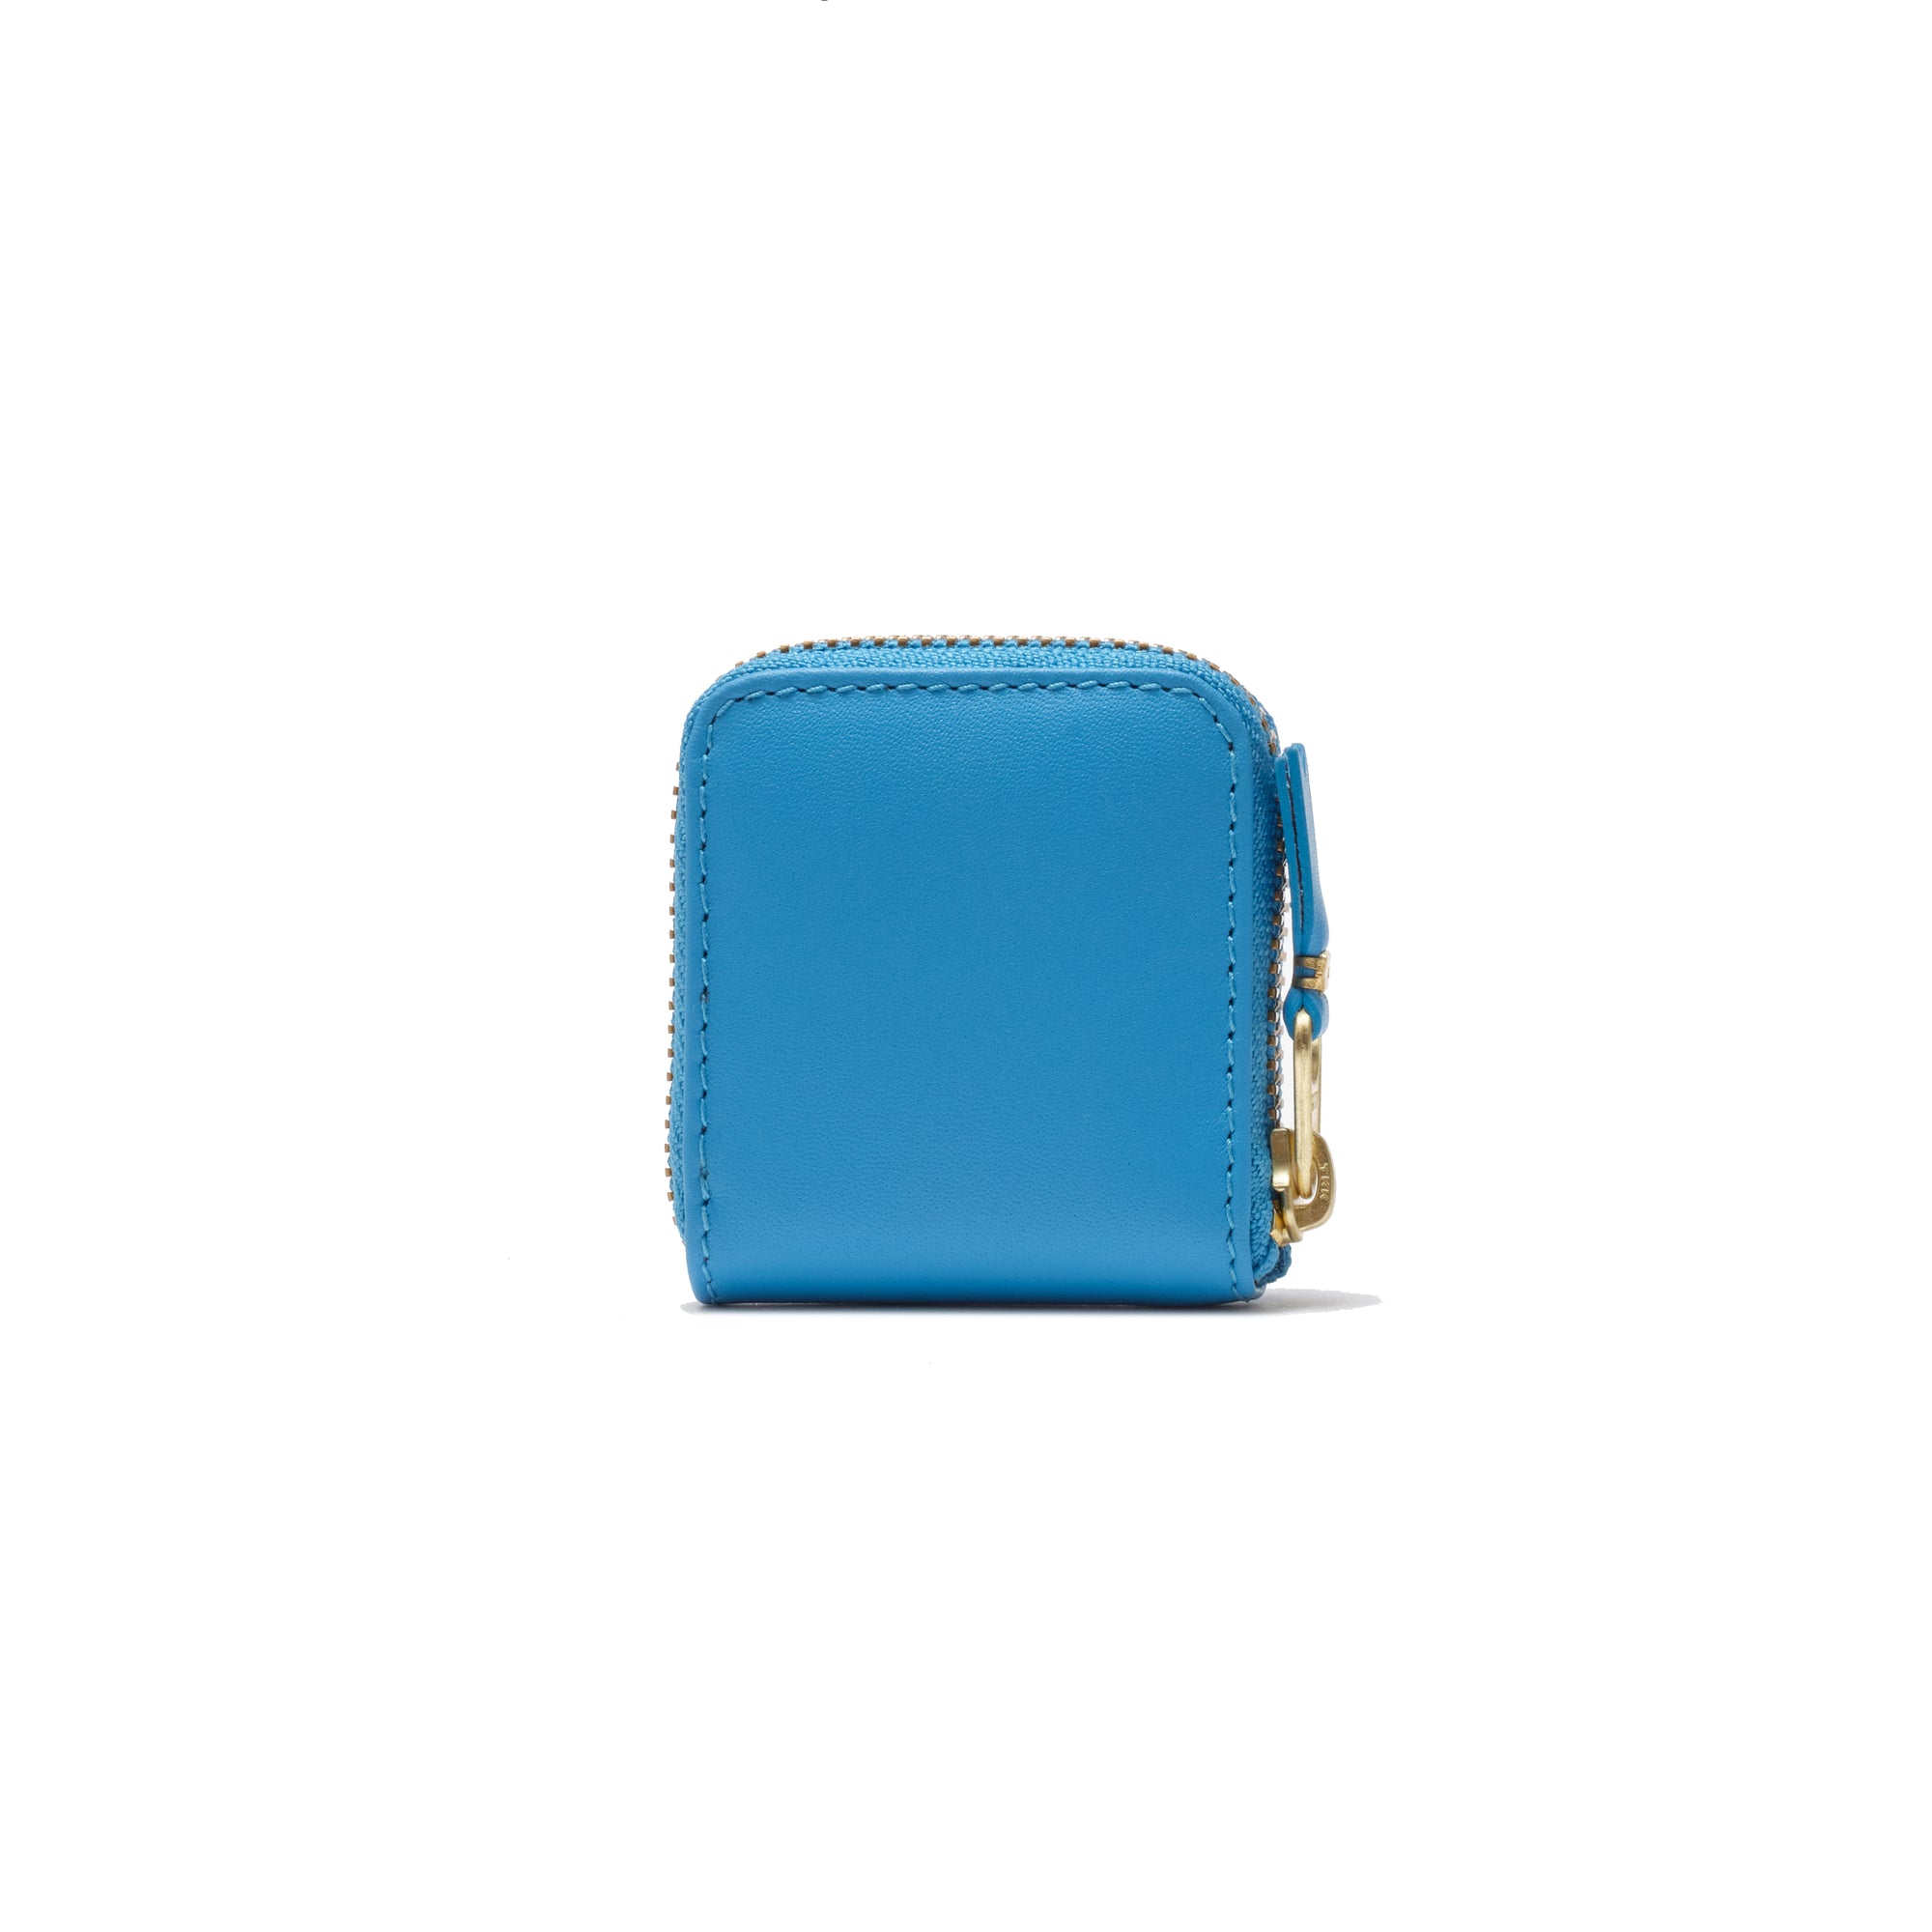 CDG WALLET - Colored Leather Line-8Z-A041 - (Blue) view 2